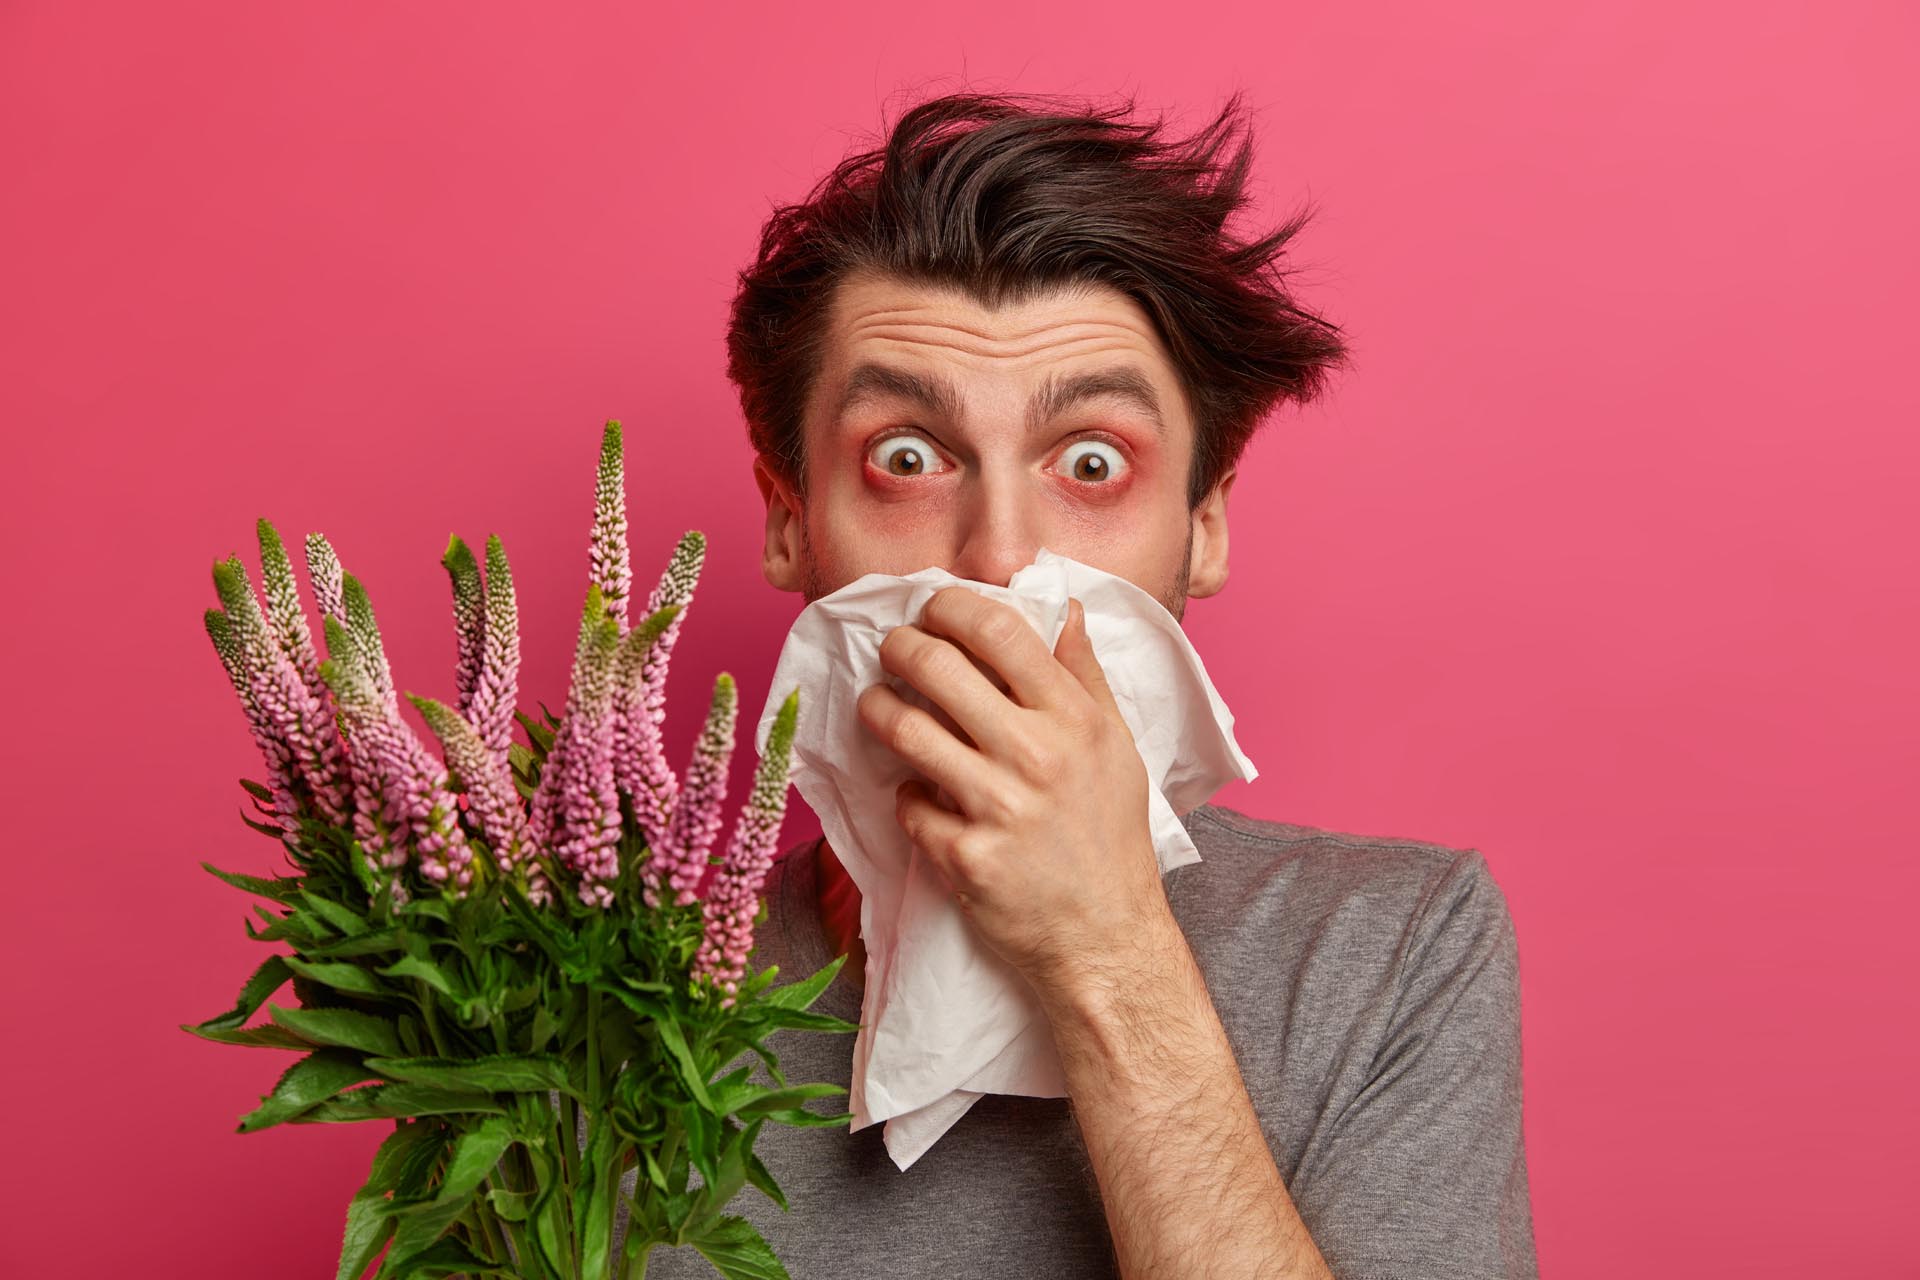 Man with allergy sneezes and covers nose with napkin, listens advice from allergist how to cure hay fever, has red watery eyes, needs to treat allergic rhinitis, isolated on pink background.